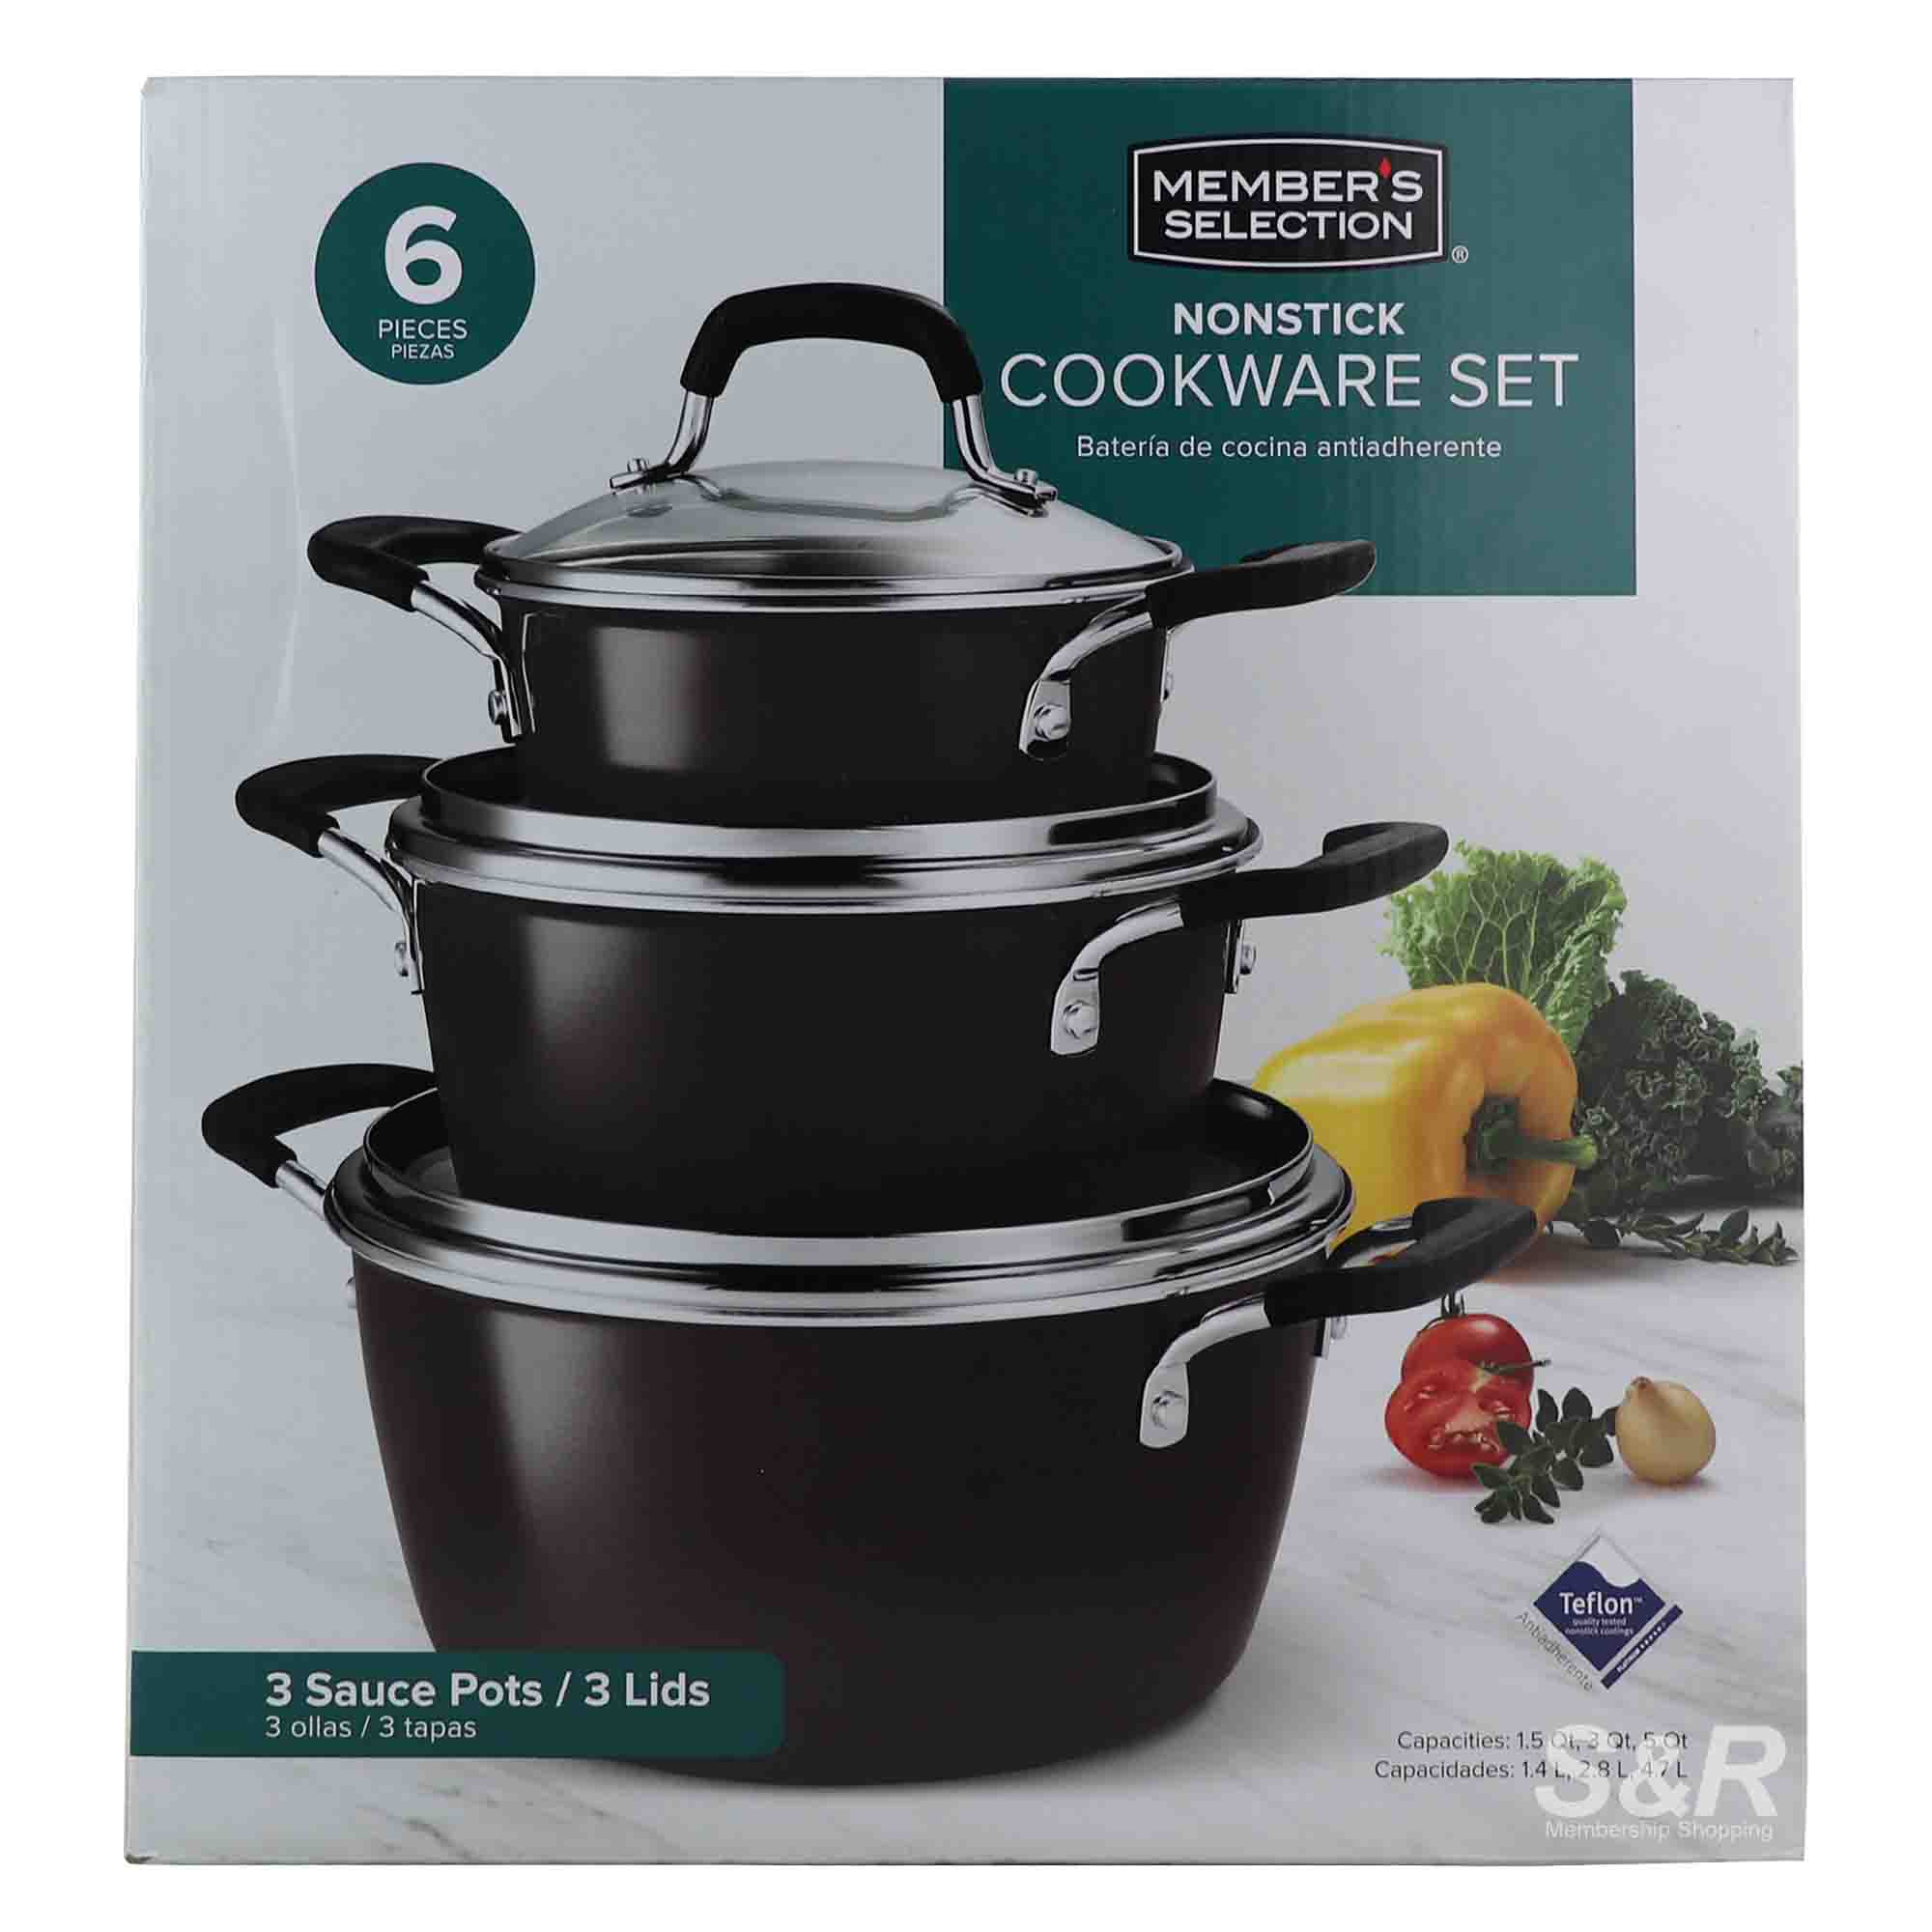 Member's Selection Nonstick Cookware 6pc Set